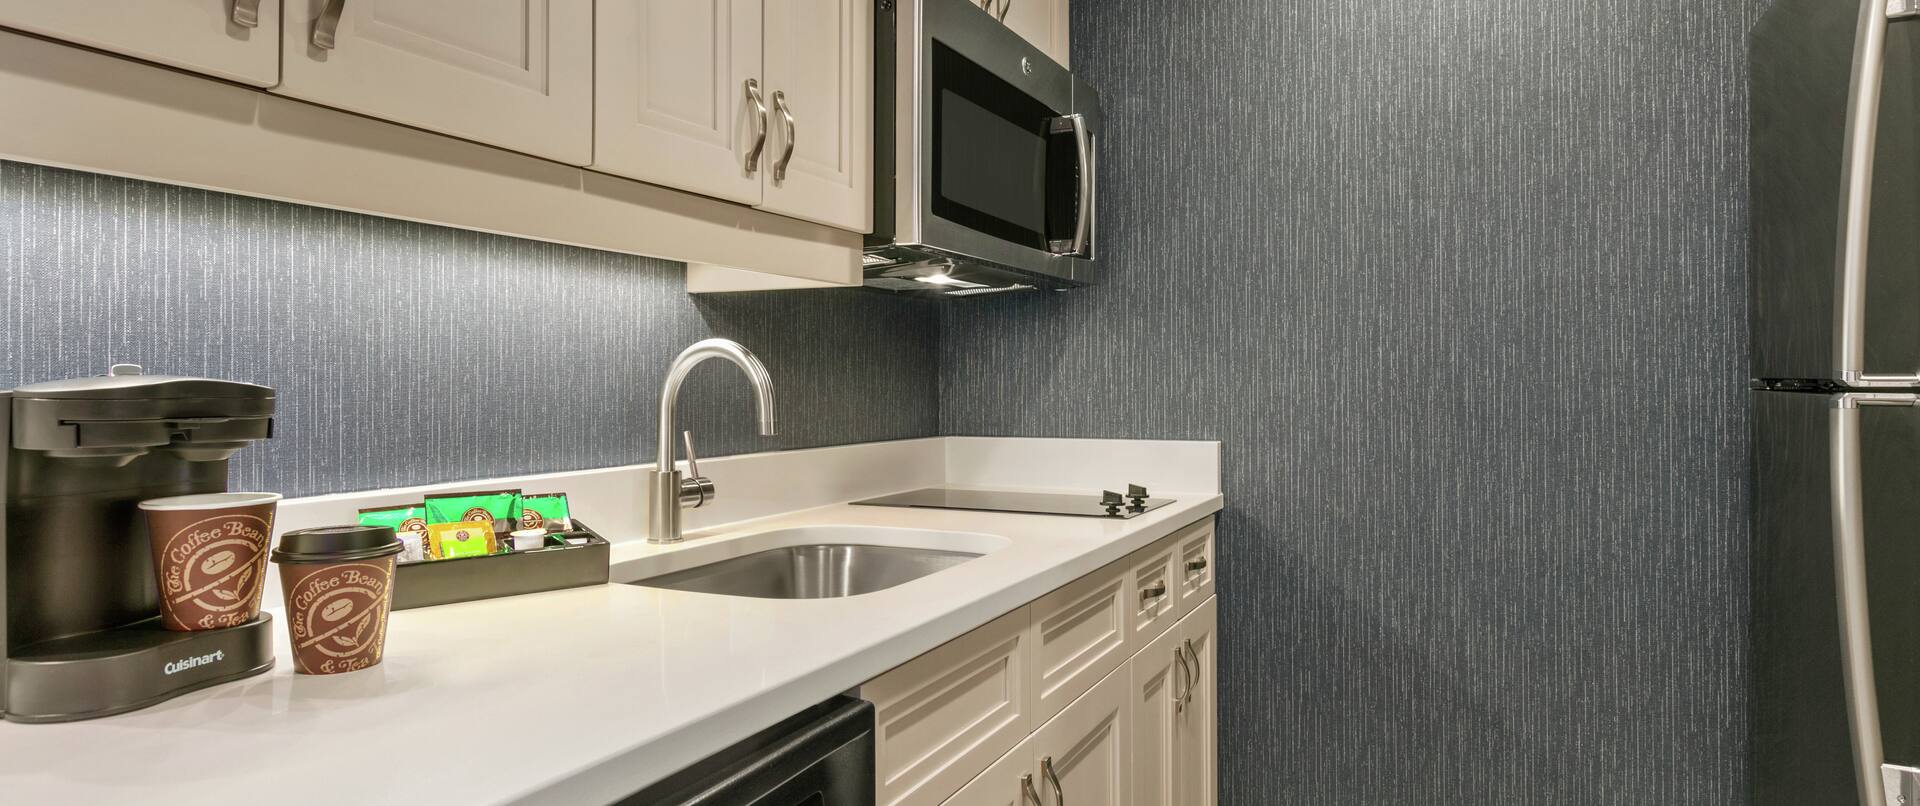 Urban Suite Kitchen with Sink, Dishwasher, Refrigerator, Microwave and Two-Burner Cooktop